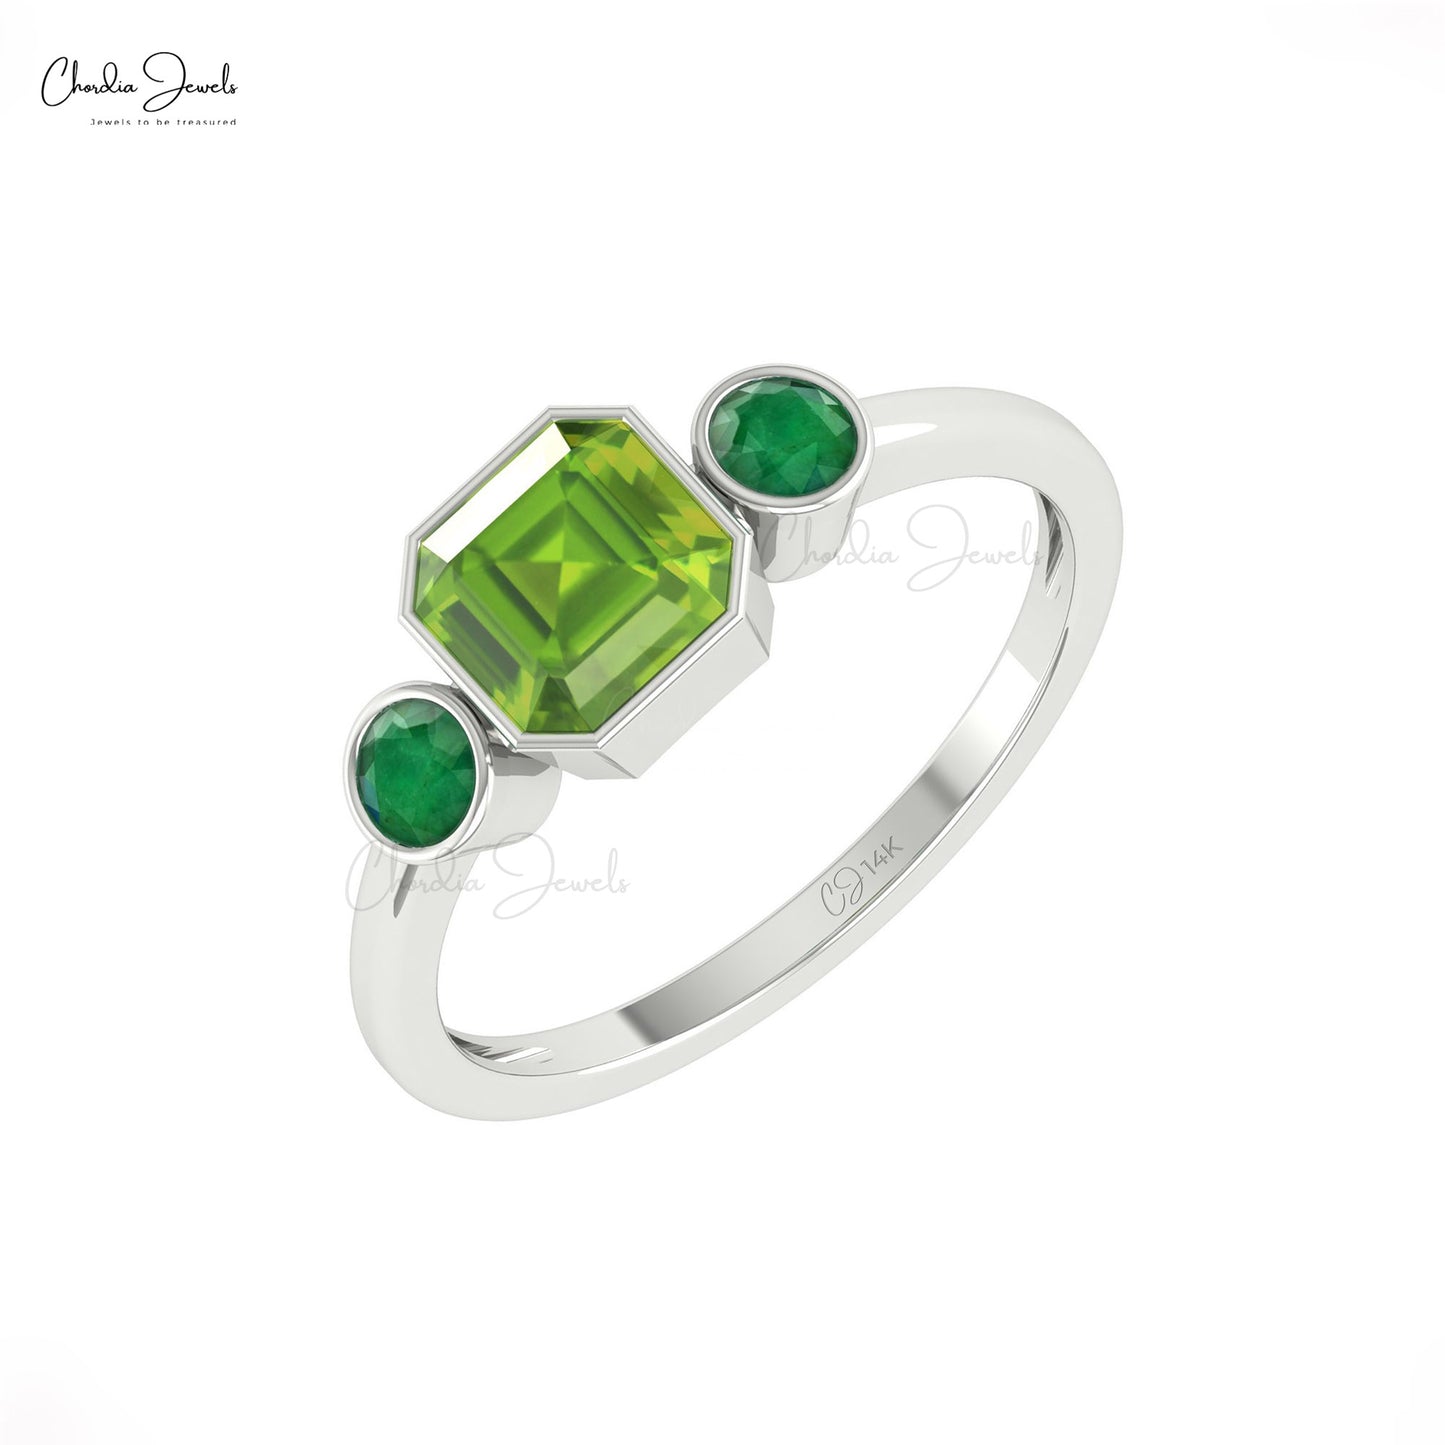 Genuine Peridot & Emerald Gemstone Combination Ring 14k Solid Gold Handcrafted 3-Stone Ring